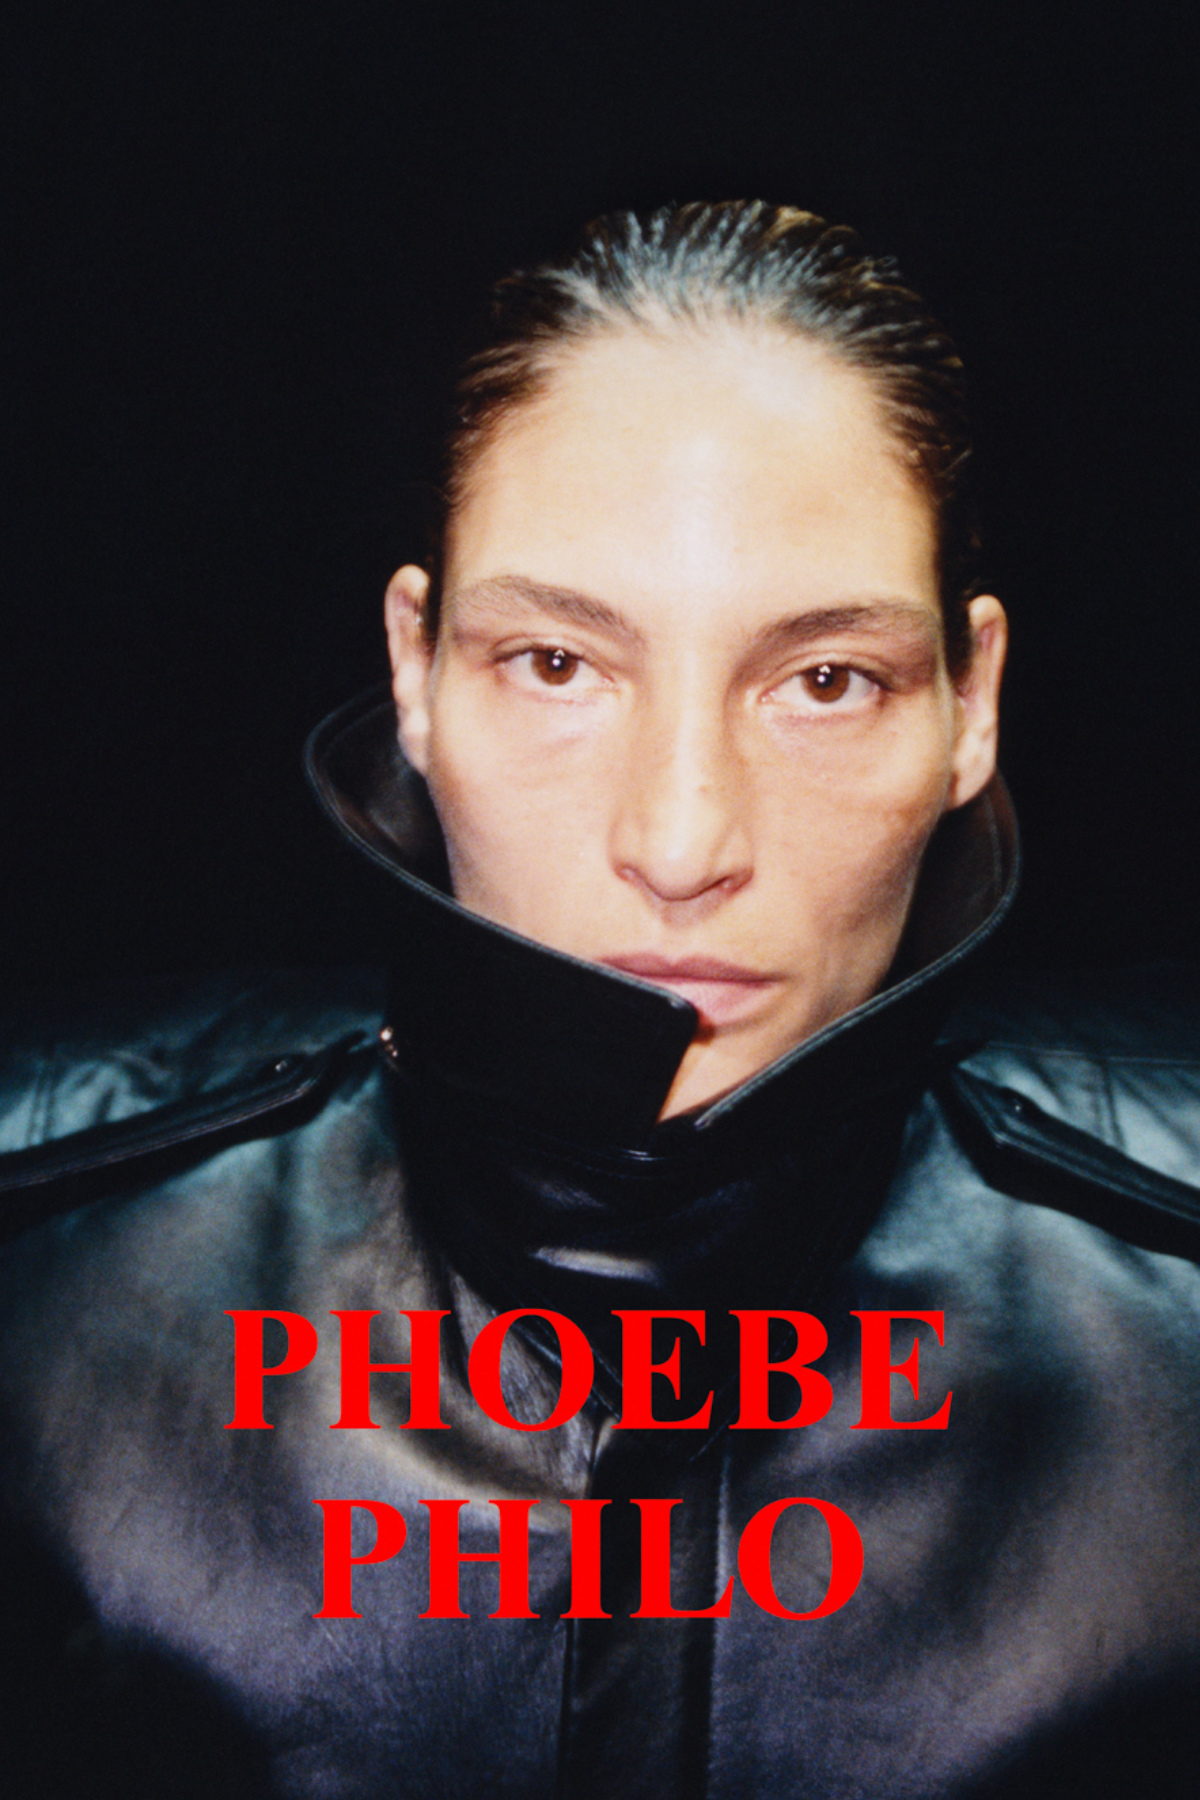 Phoebe Philo New Brand: Designer Returns with Her Own Label Oct